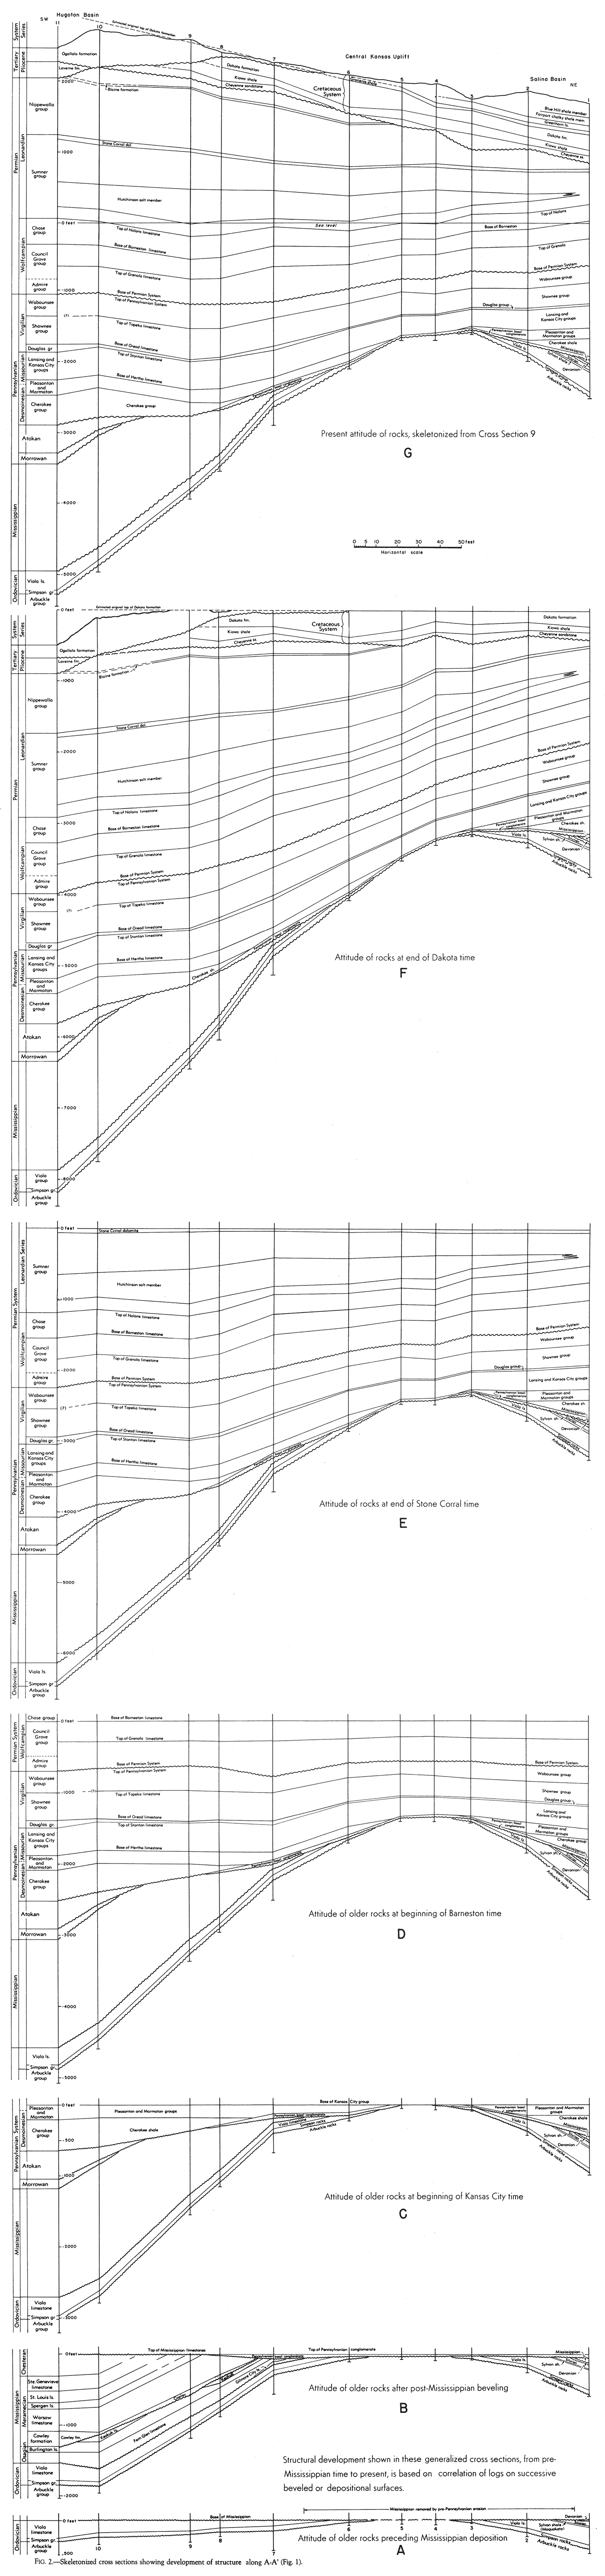 Skeletonized cross sections showing development of structure along A-A'.